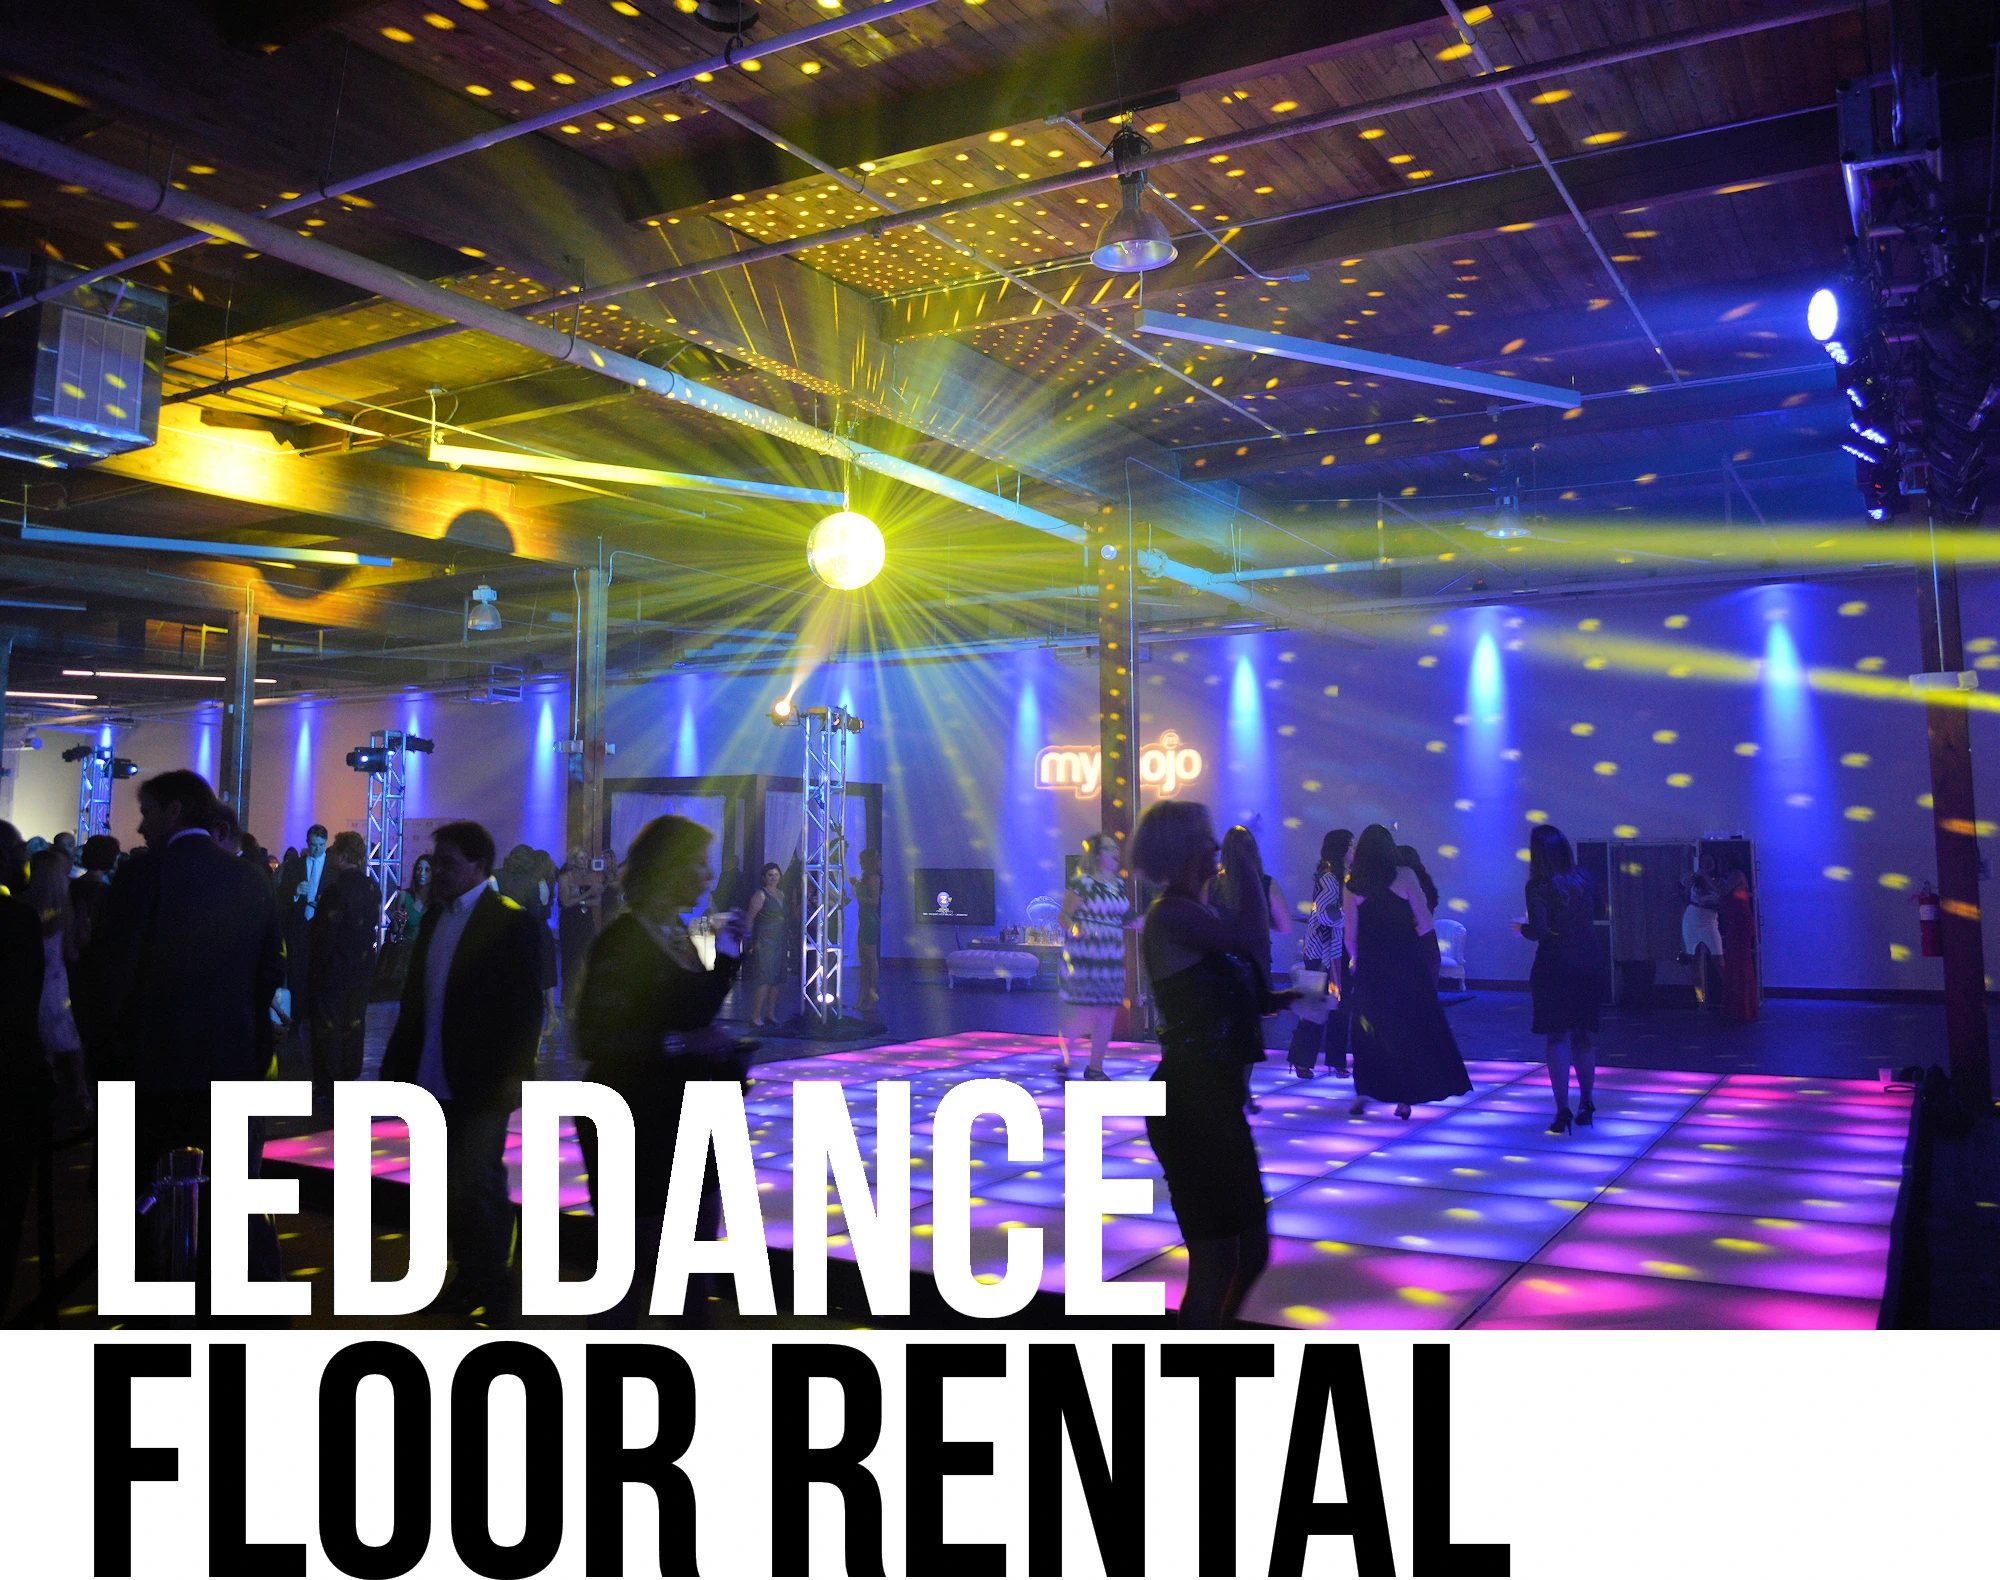 Large, square, lighted dance floor in blue within a restaurant and bar venue.